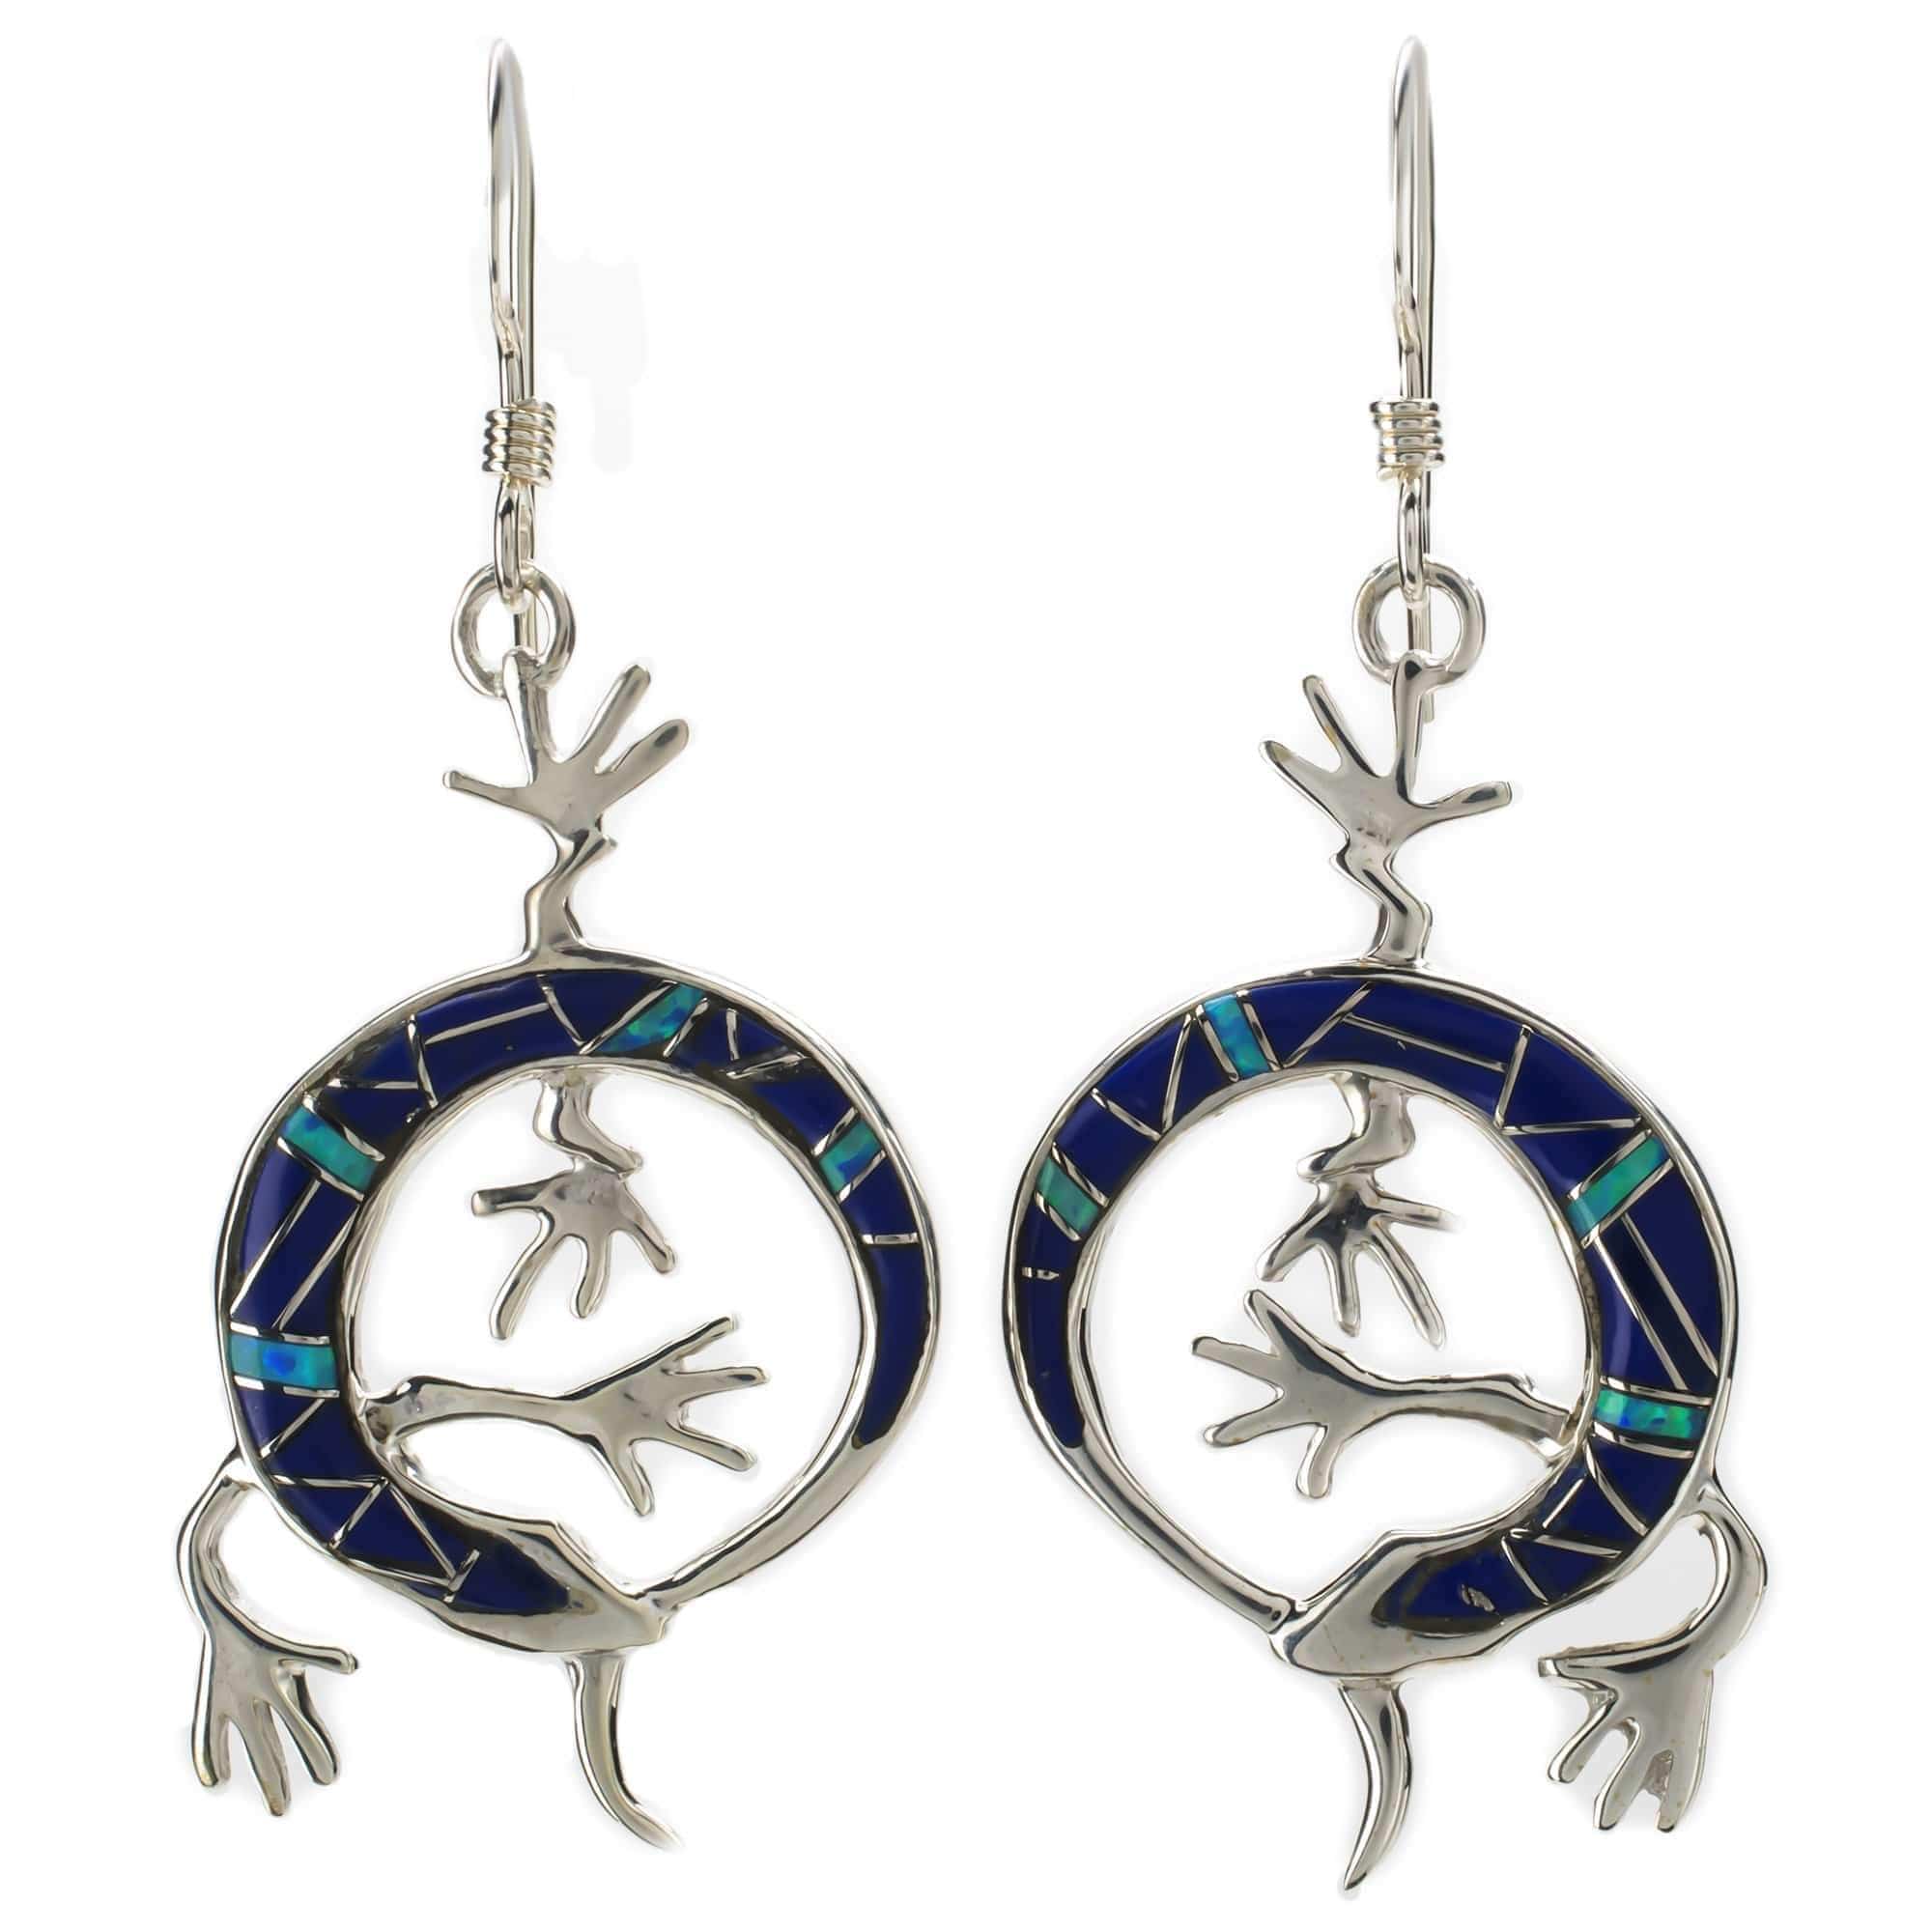 Kalifano Southwest Silver Jewelry Lapis Lizard 925 Sterling Silver Earring with French Hook USA Handmade with Aqua Opal Accent NME.2162.LP